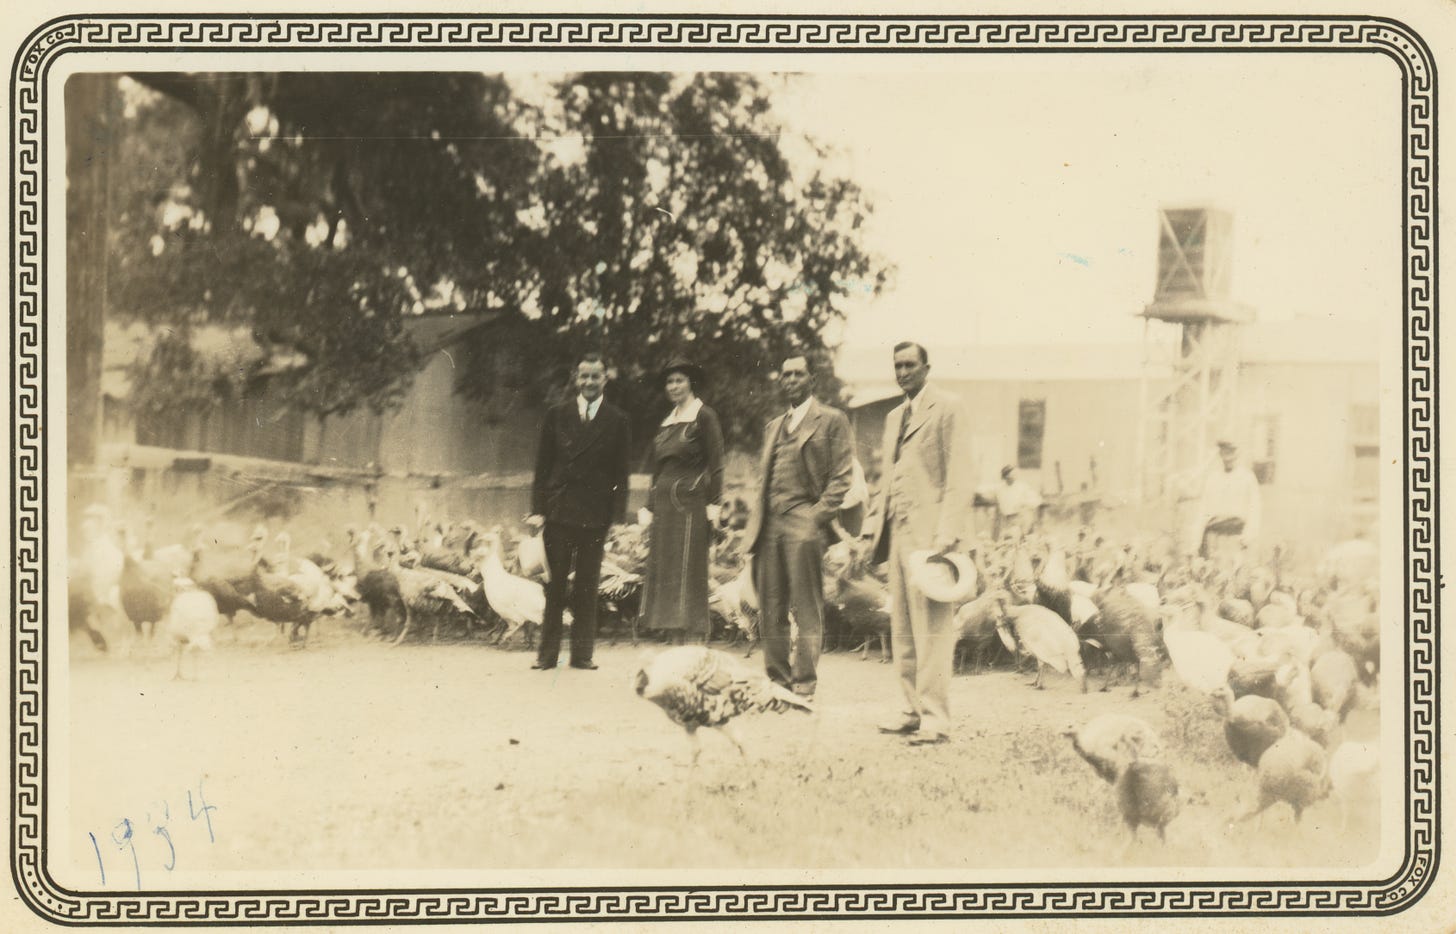 A sepia-tinted black-and-white photo of three men in suits and a woman in a dress, standing amid a flock of turkeys